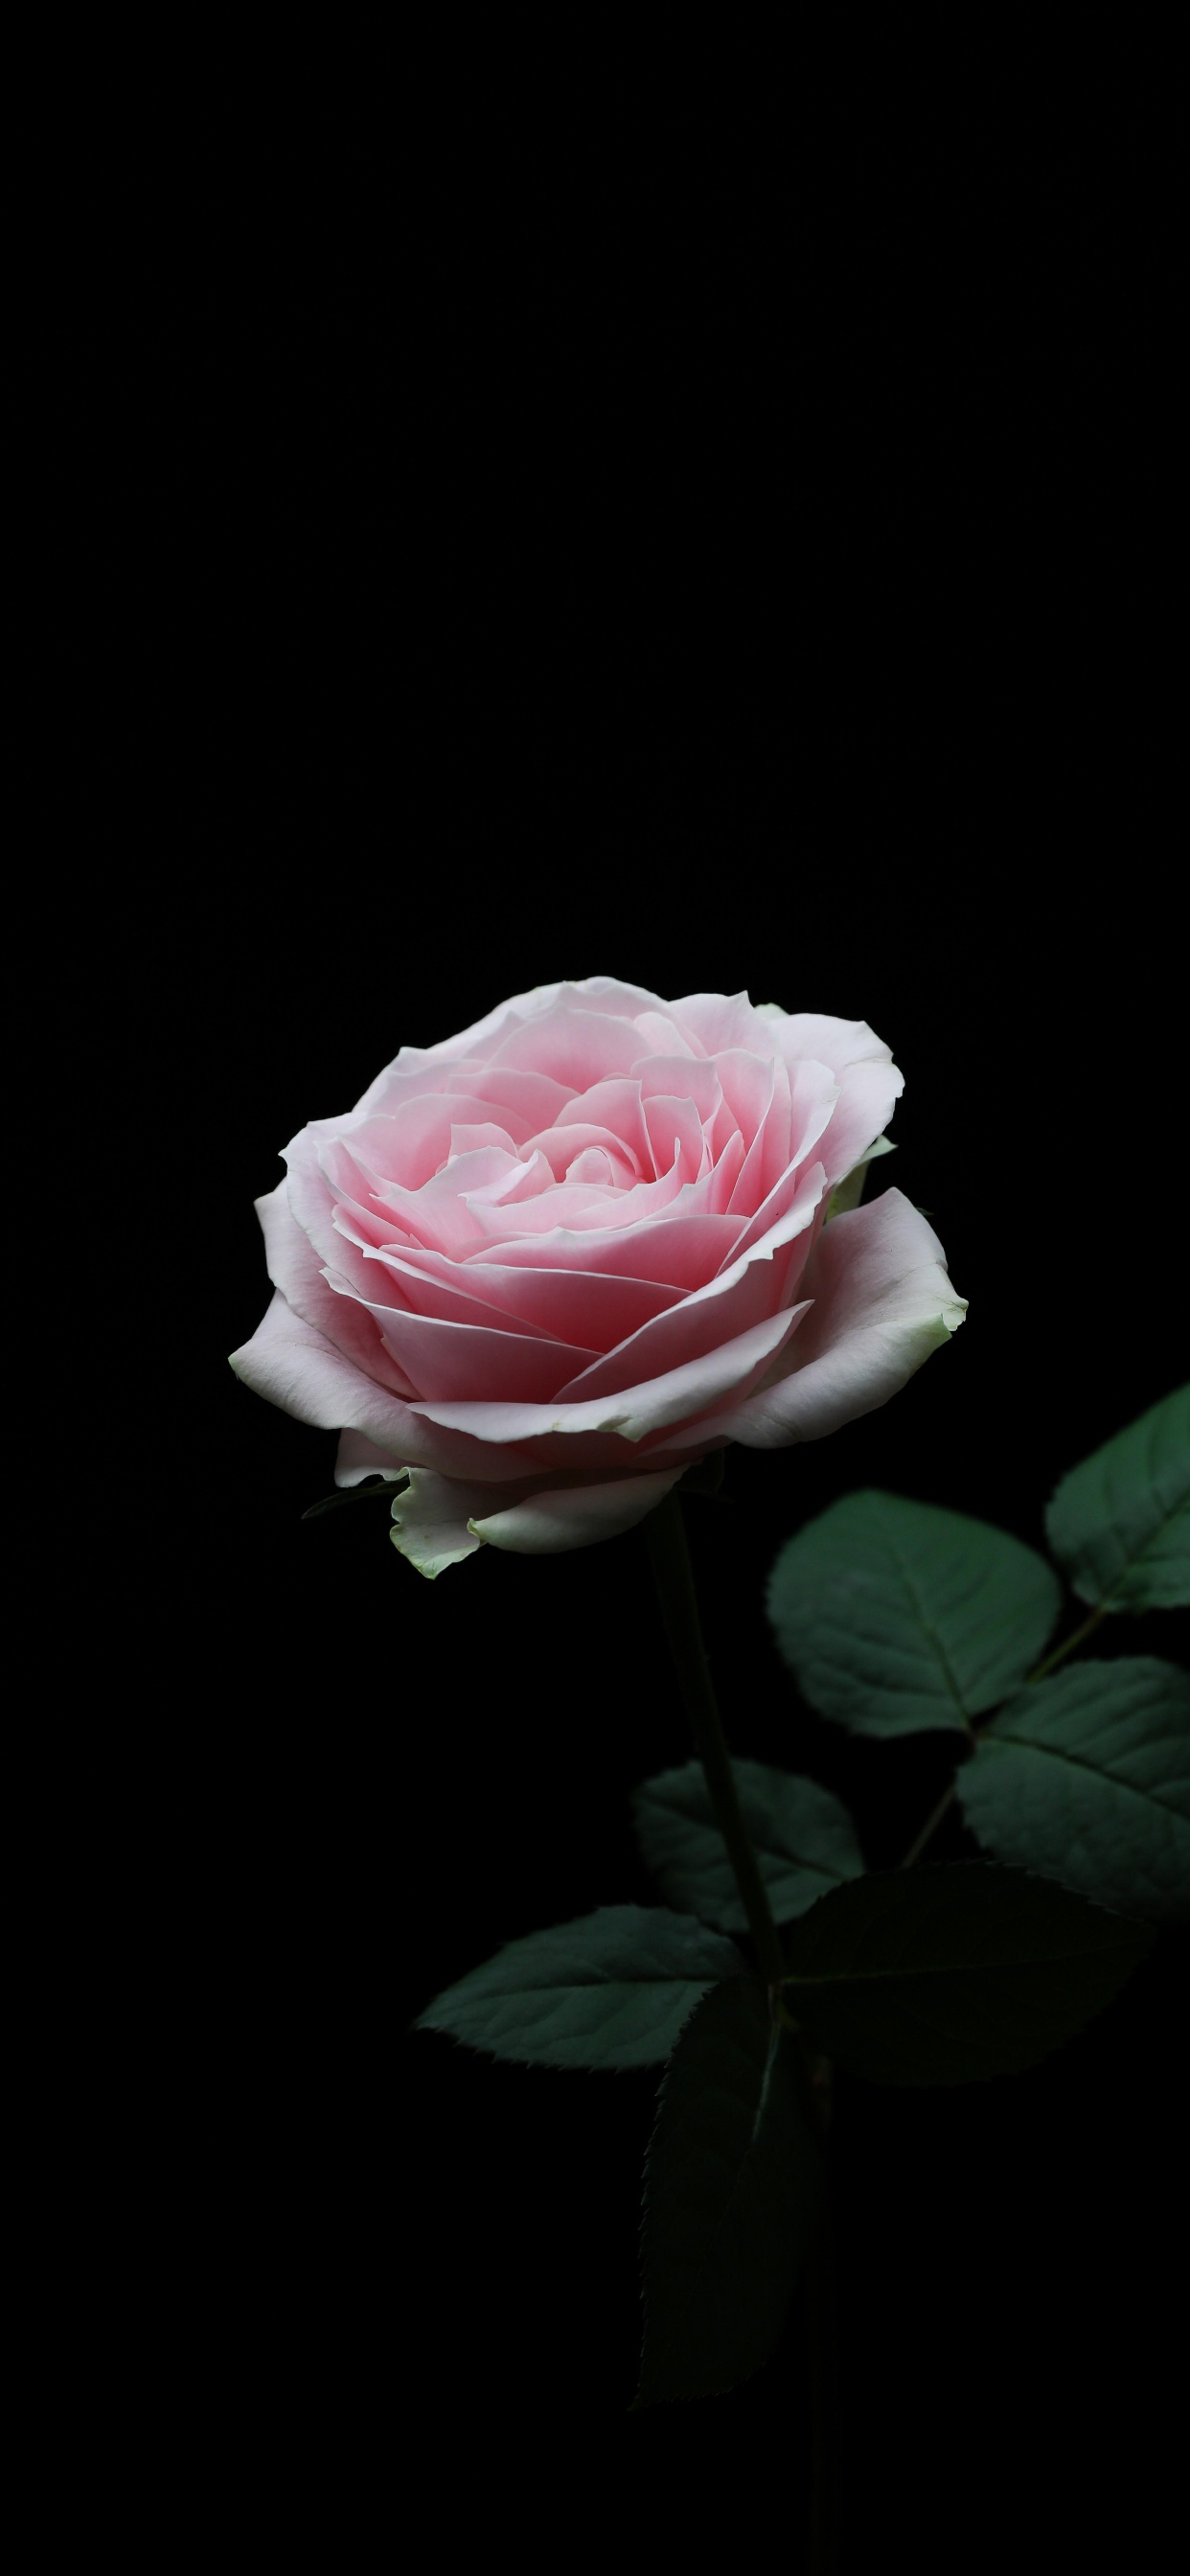 Pink Rose in Bloom With Black Background. Wallpaper in 1242x2688 Resolution